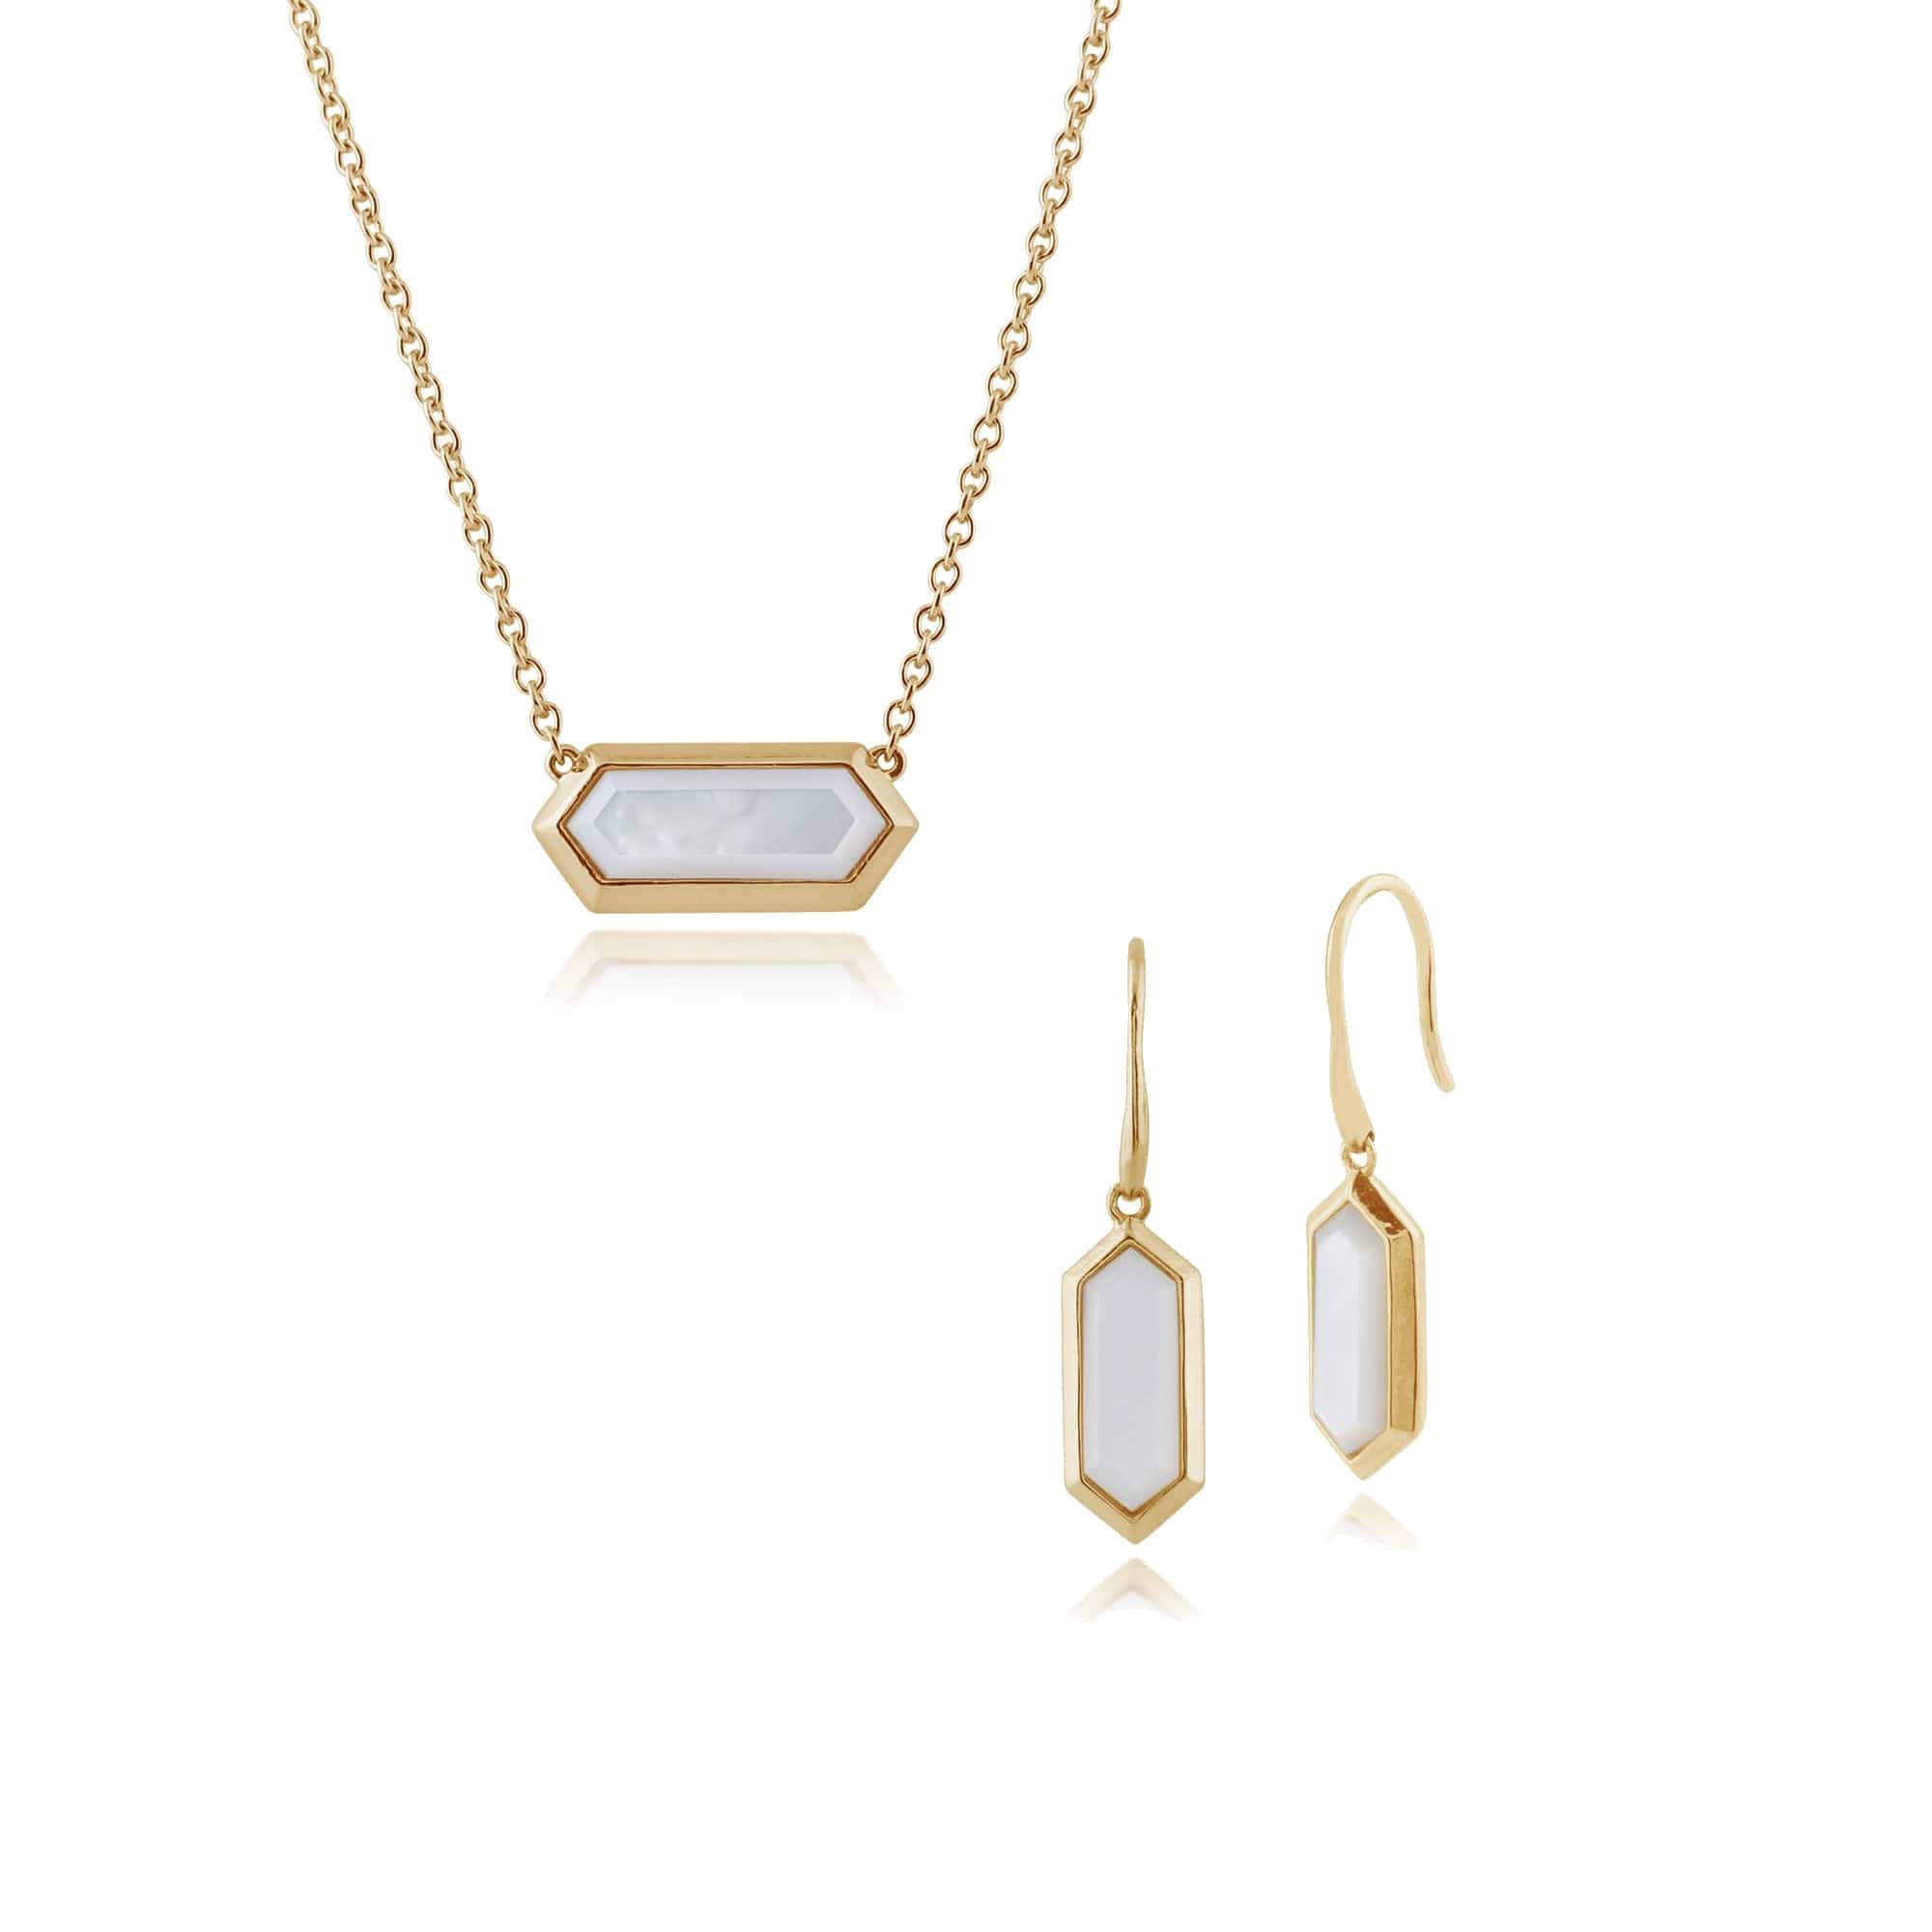 271E012503925-271N011503925 Hexagon Mother of Pearl Hexagon Drop Earrings & Necklace Gold Plated Set 1